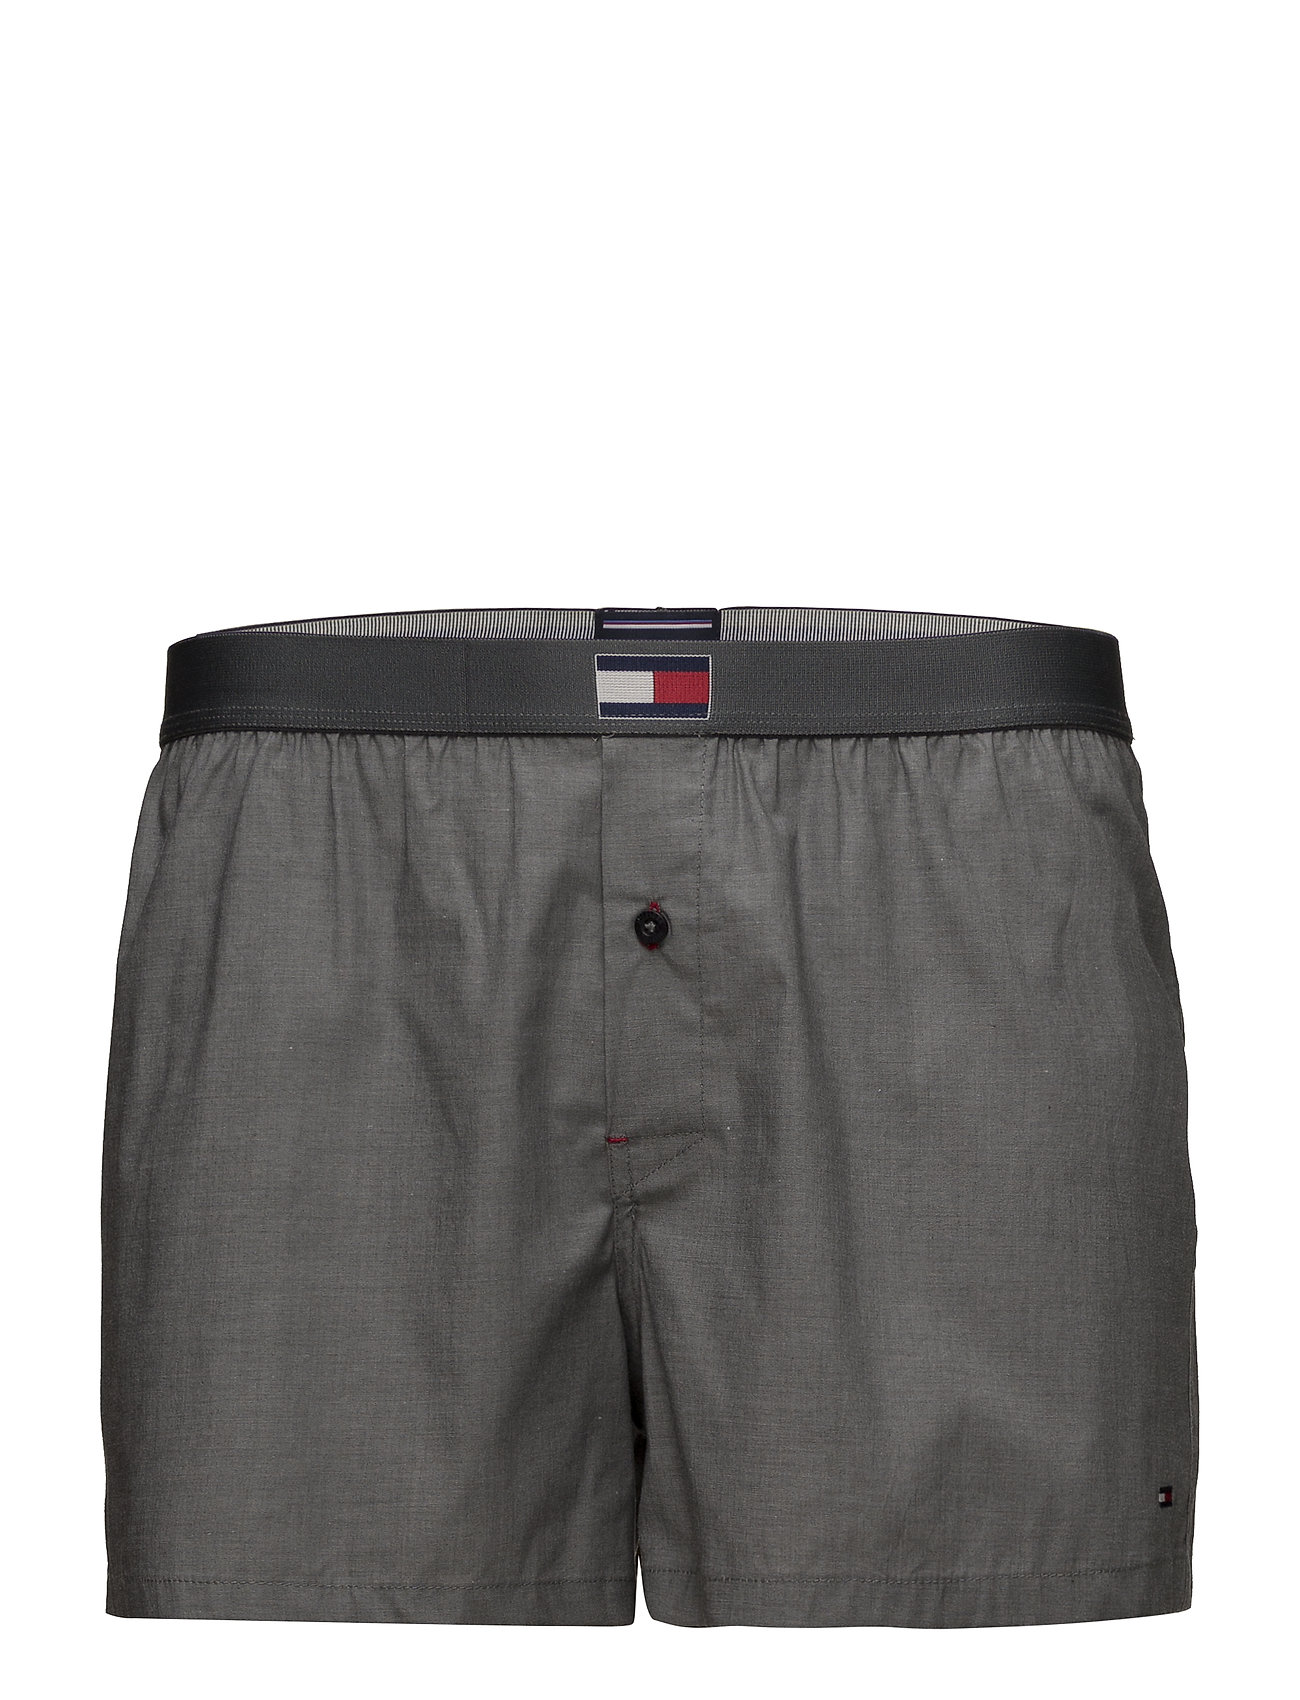 tommy hilfiger woven boxers